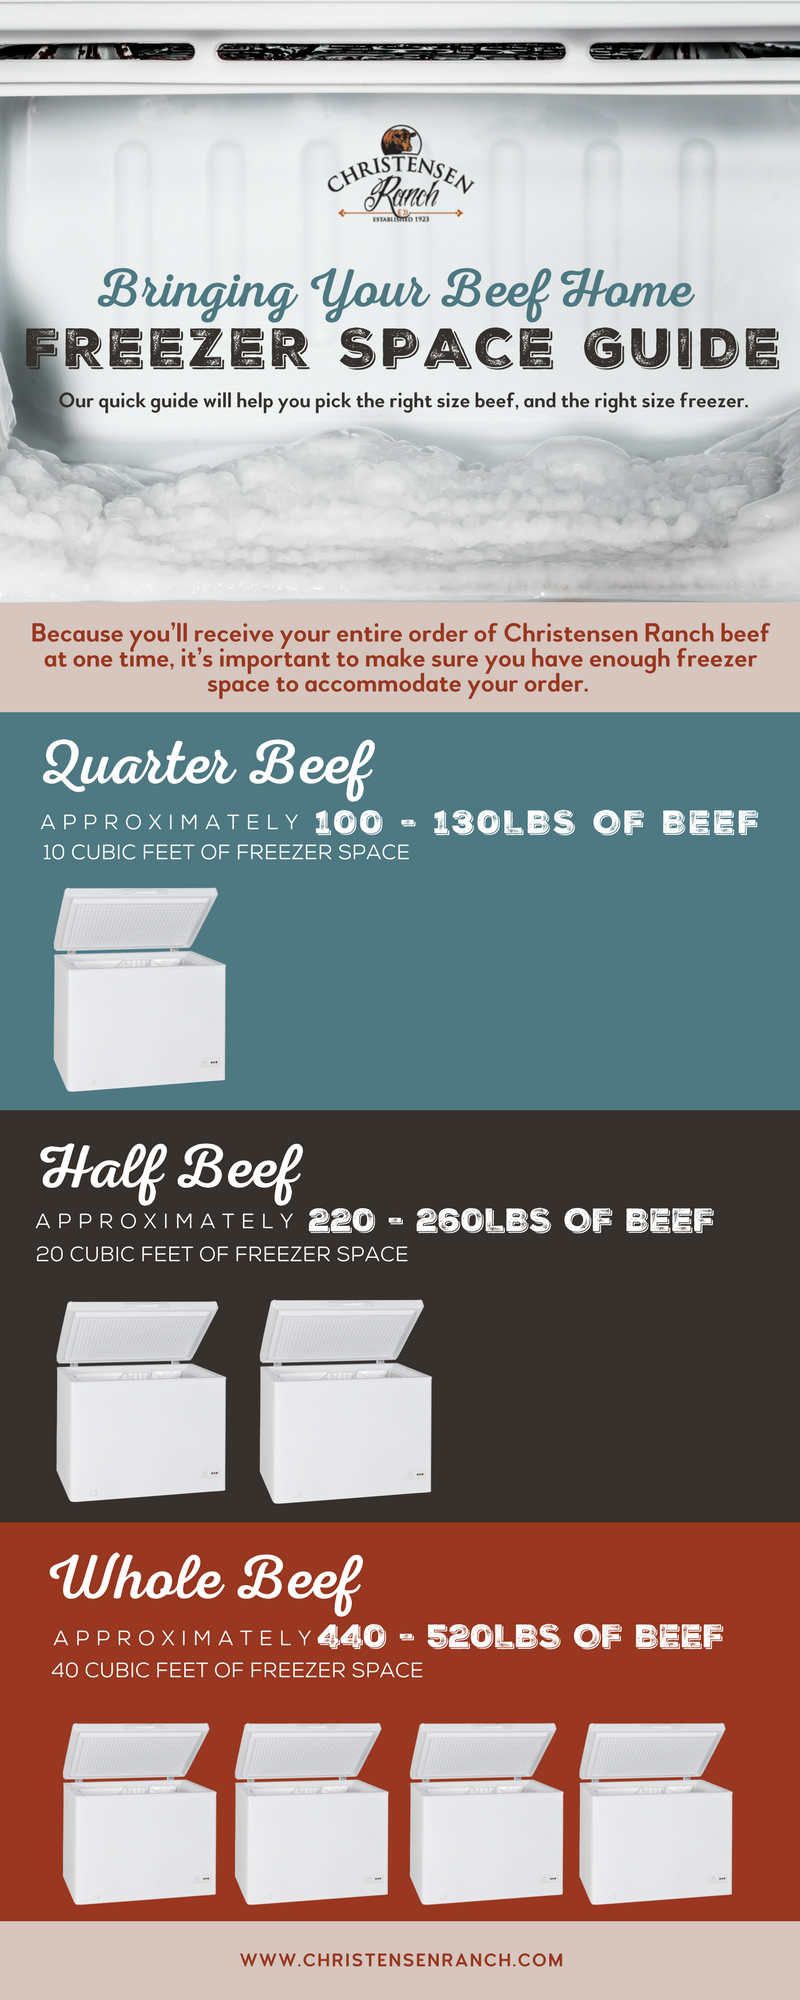 Infographic illustrating the amount of freezer space needed for each size of beef